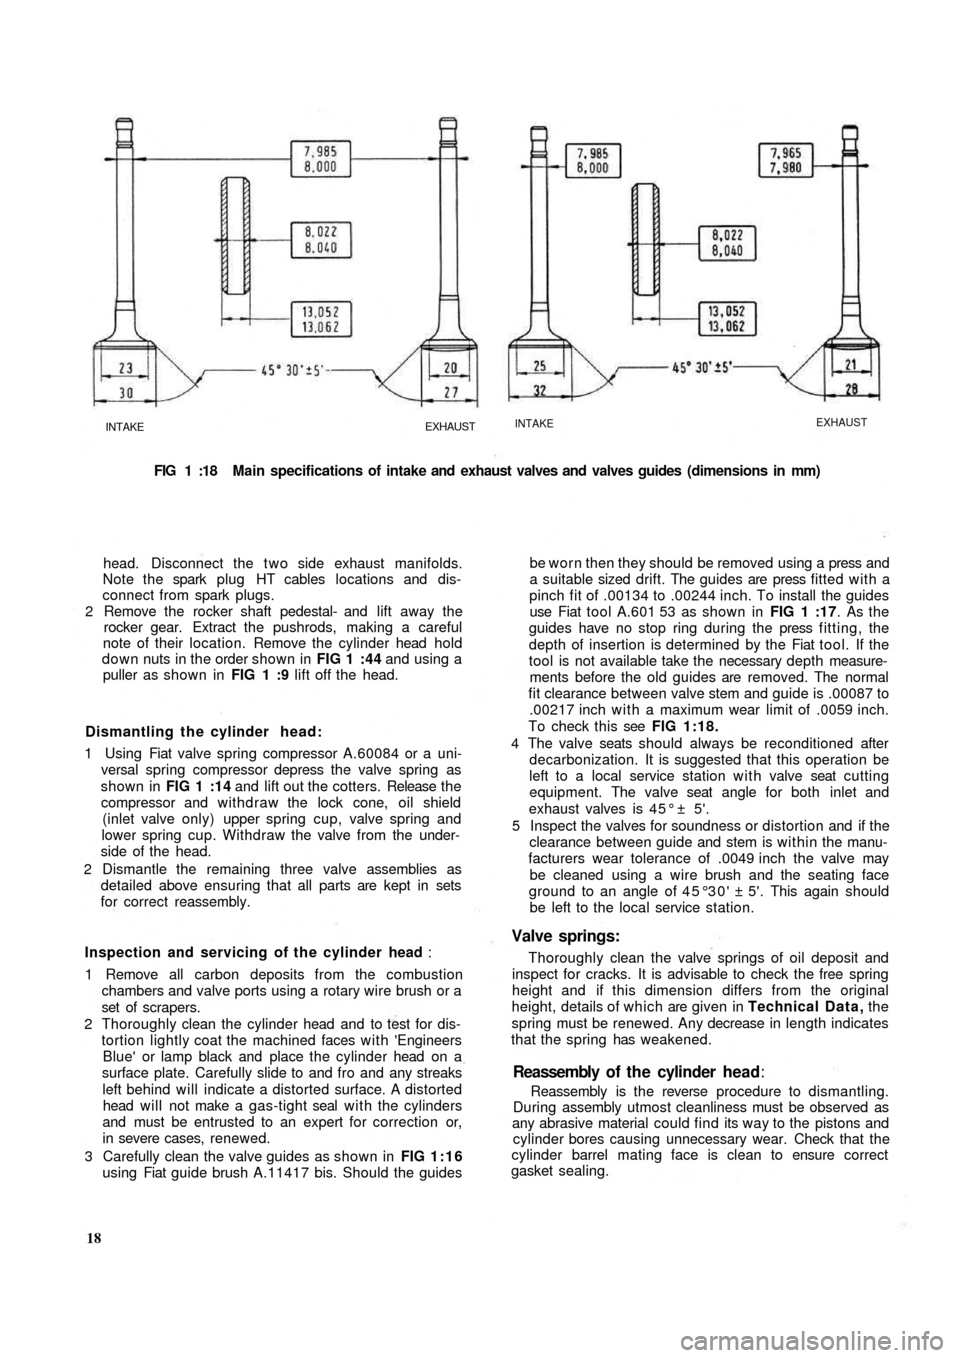 FIAT 500 1960 1.G User Guide INTAKEEXHAUSTINTAKEEXHAUST
FIG 1 :18  Main specifications of intake and exhaust valves and valves guides (dimensions in  mm)
head. Disconnect the t w o side exhaust manifolds.
Note the spark  plug  HT